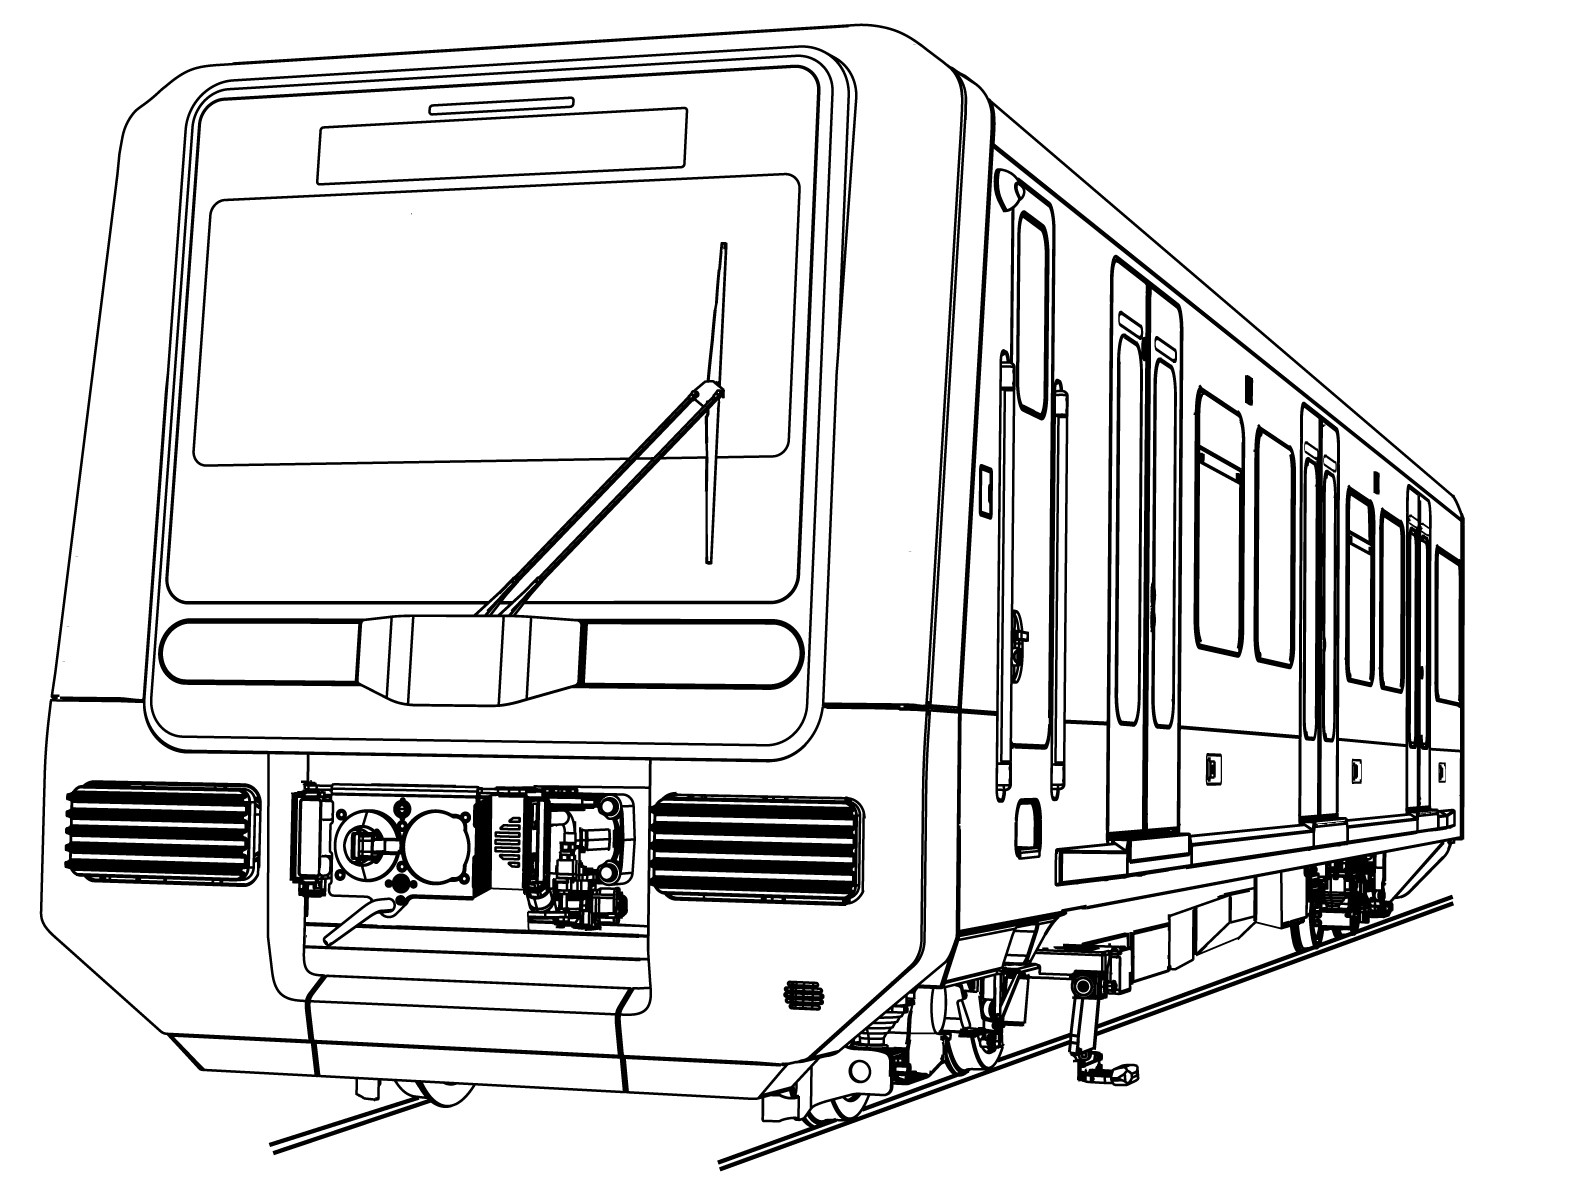 Train drawing Images - Search Images on Everypixel